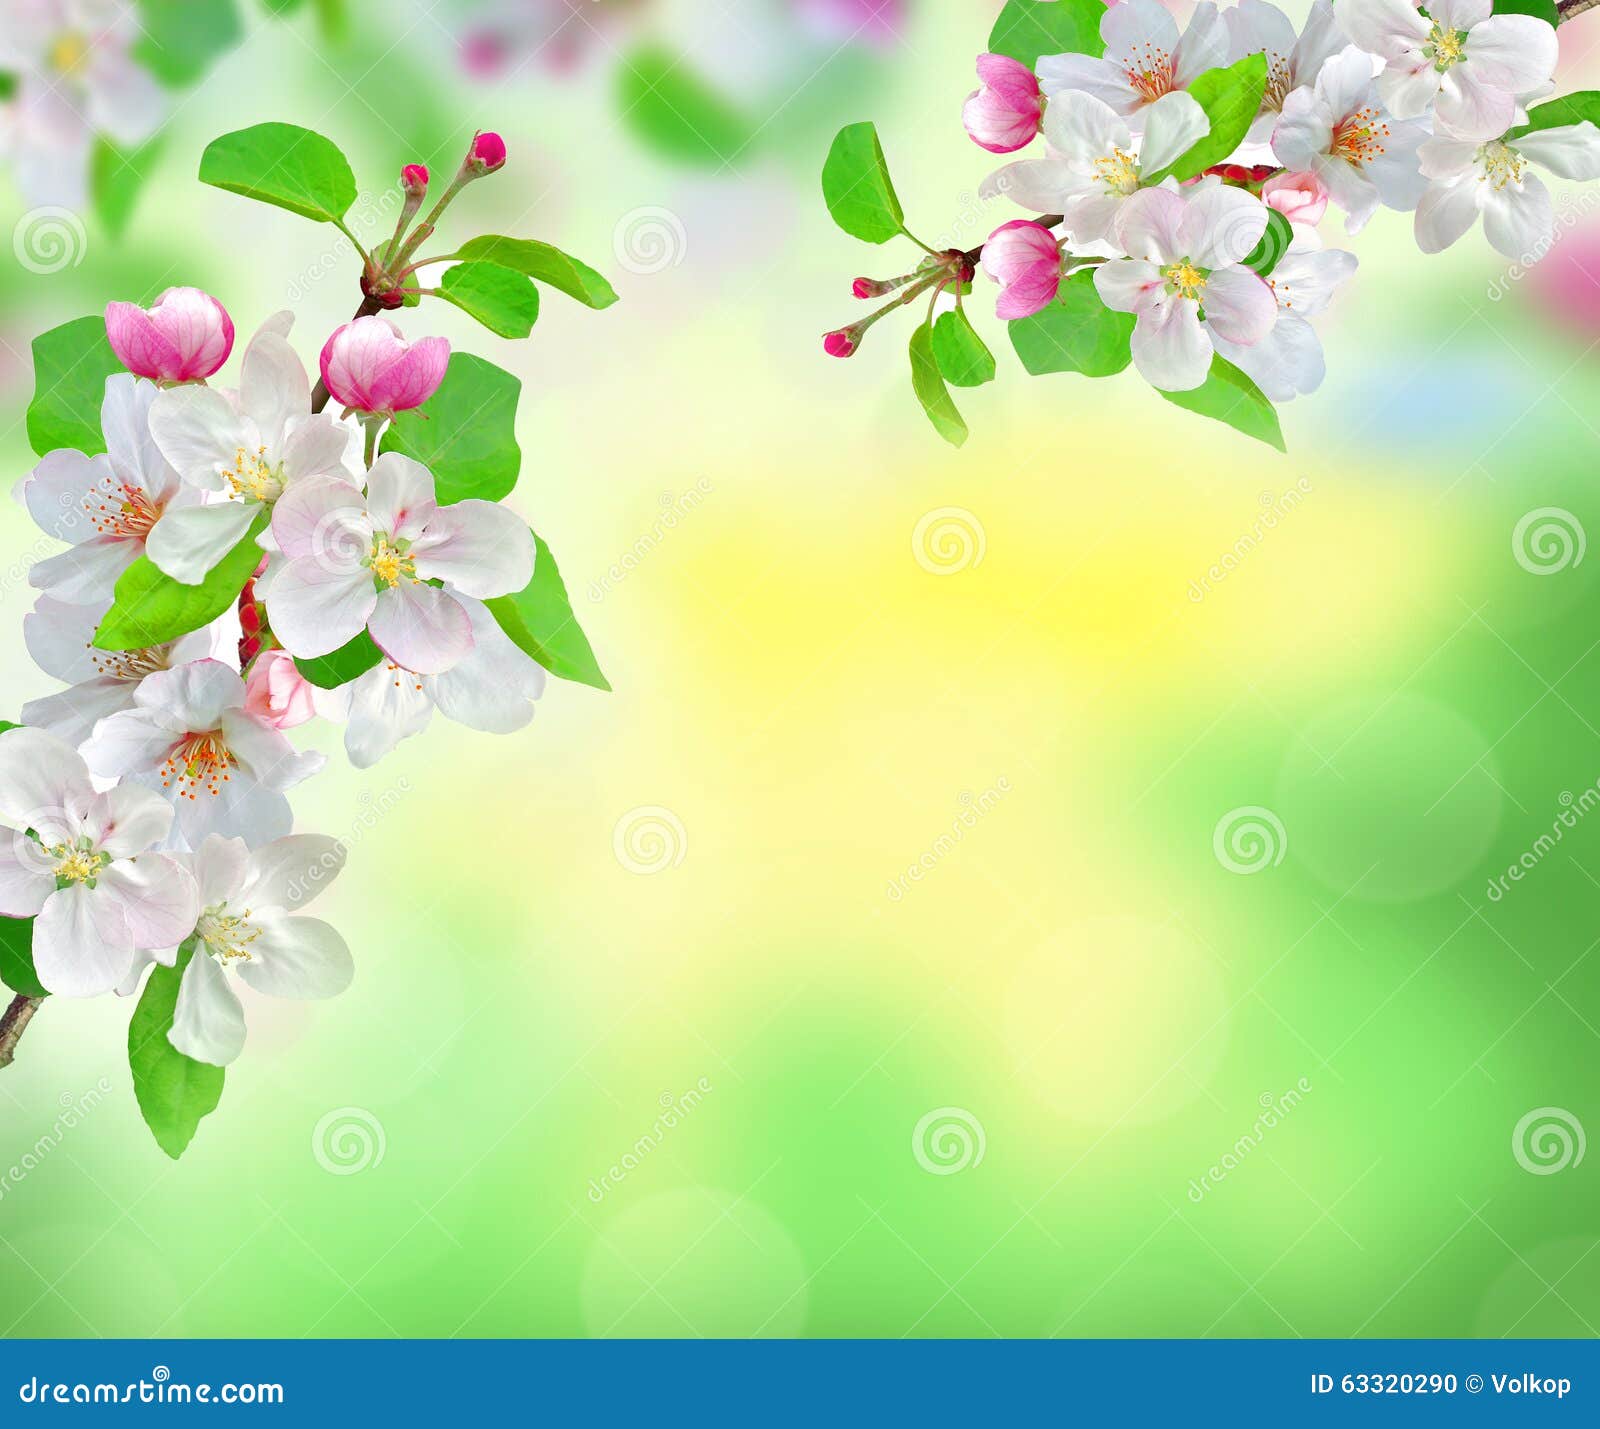 Beautiful White Spring Blossom On Blurred Nature Background Stock